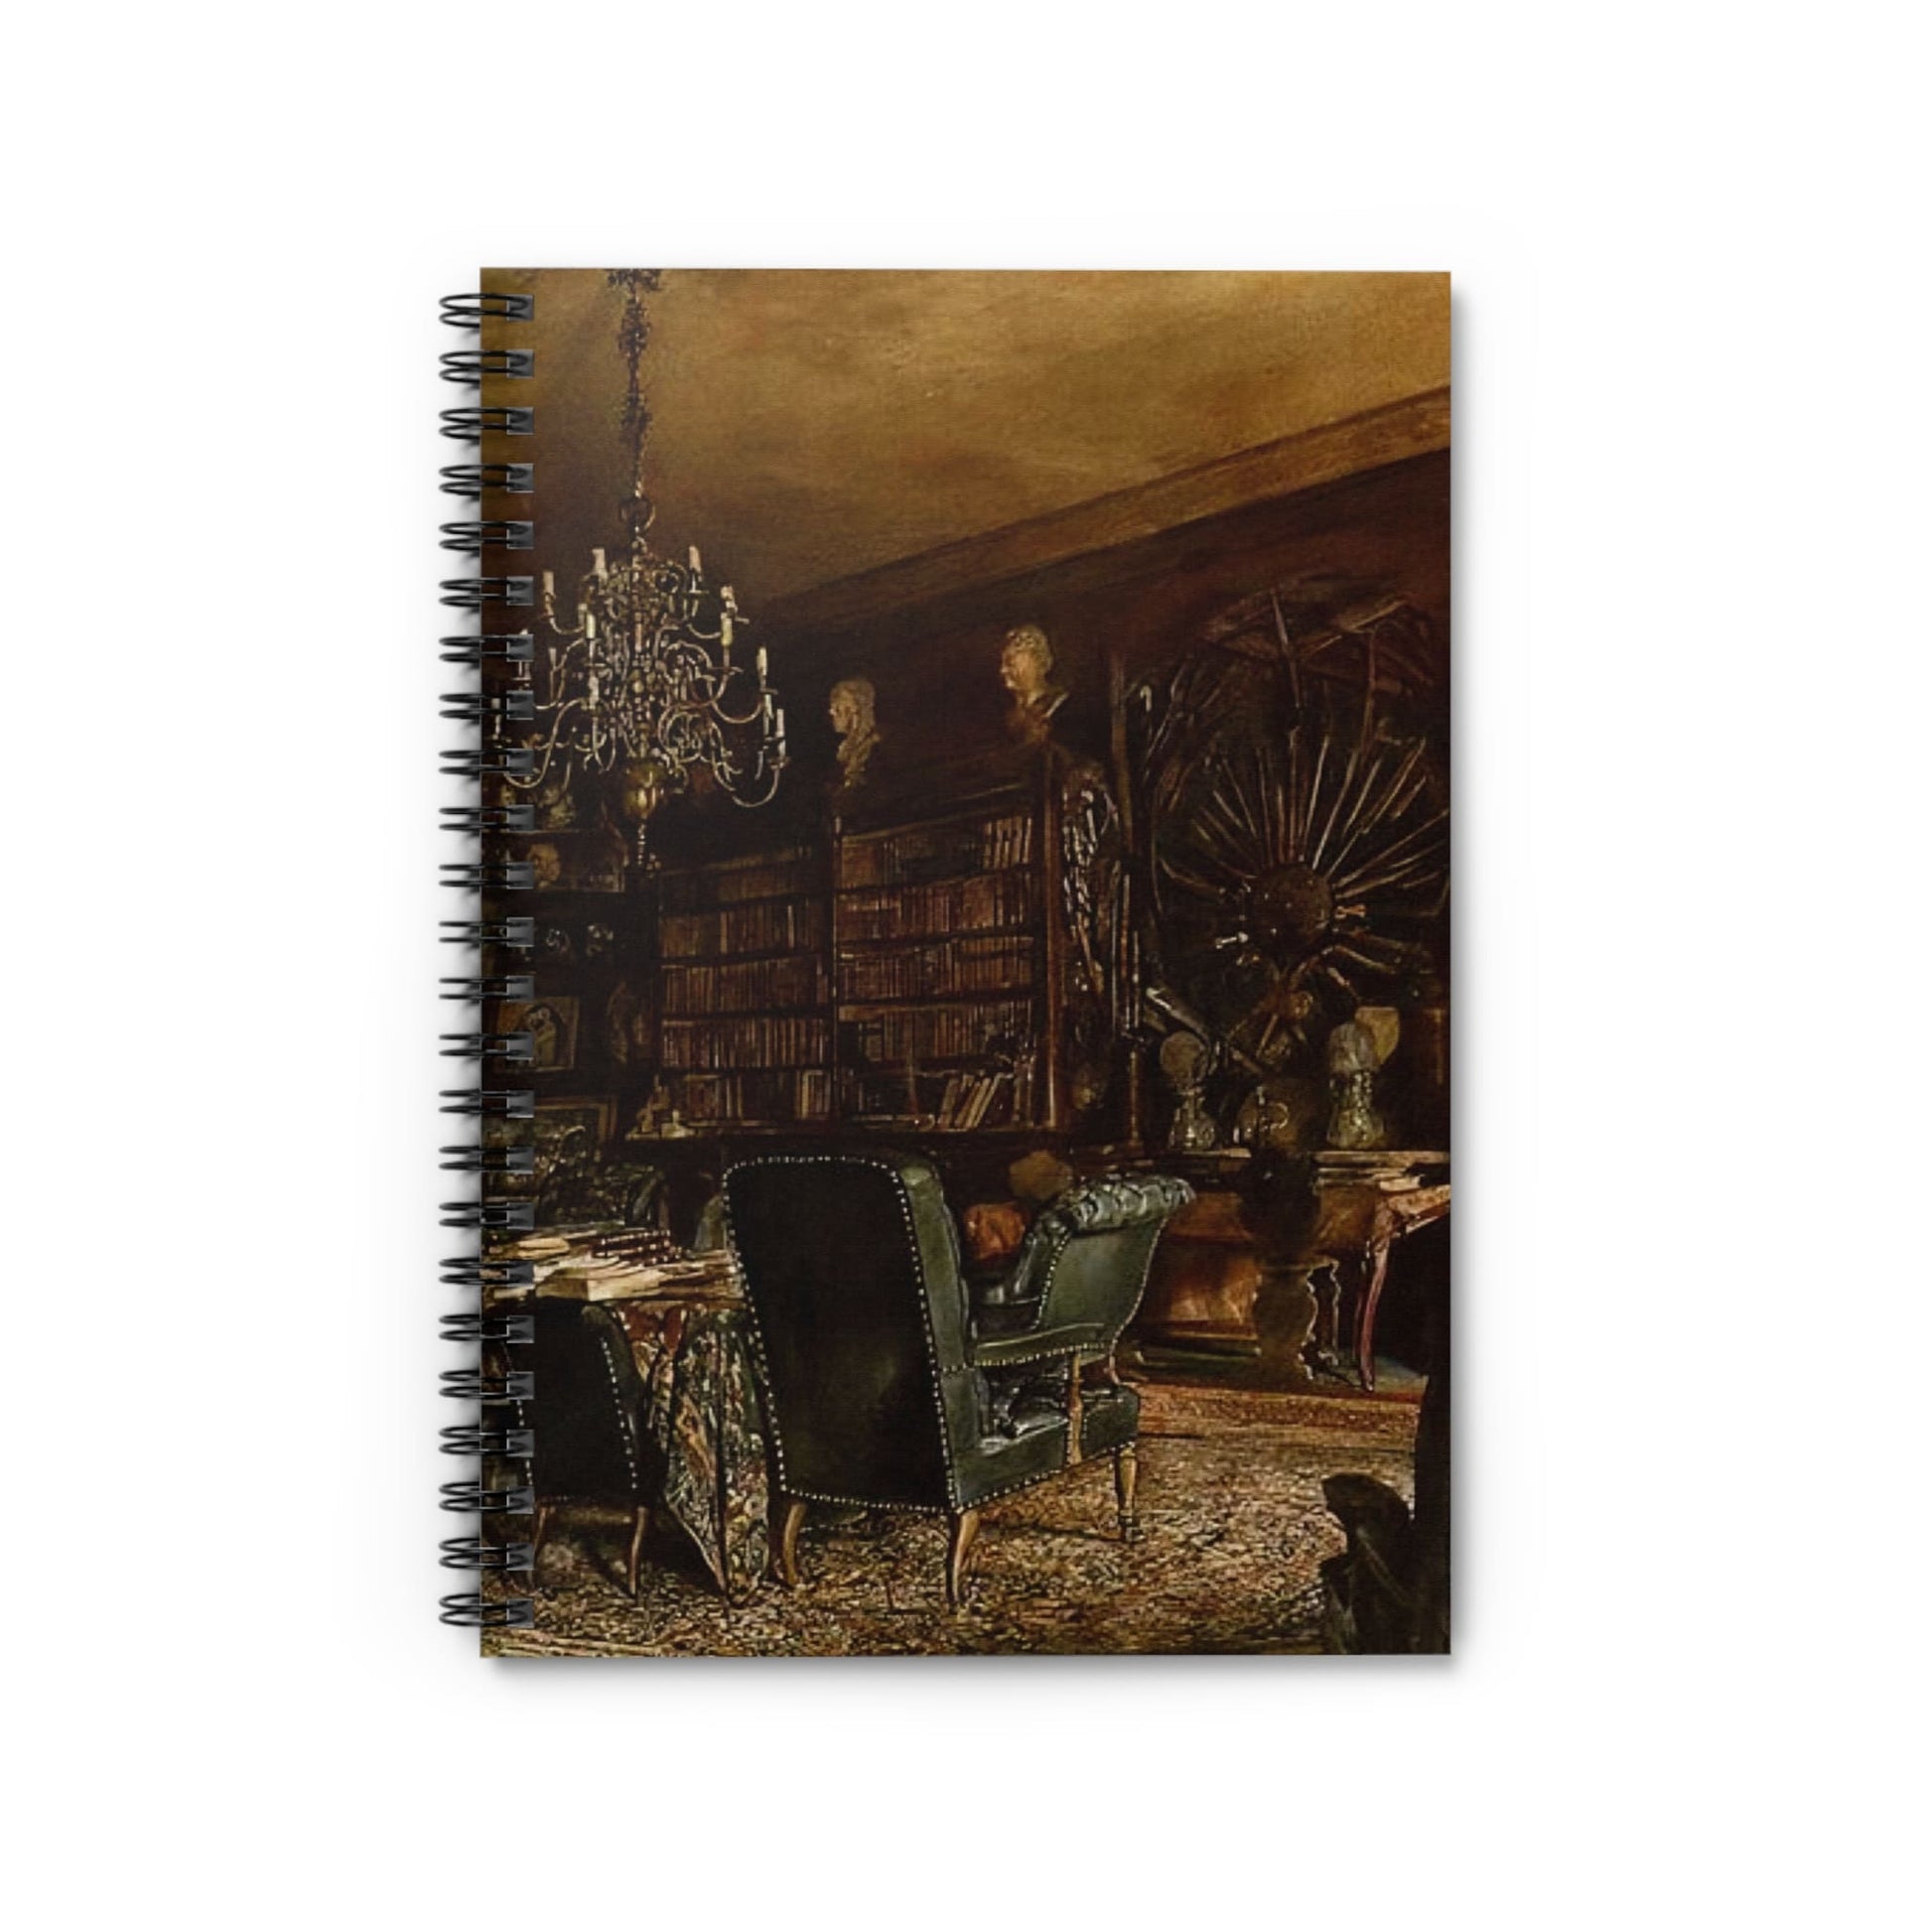 Dark Academia Room Notebook with dark library cover, perfect for journaling and planning, showcasing dark academia library designs.